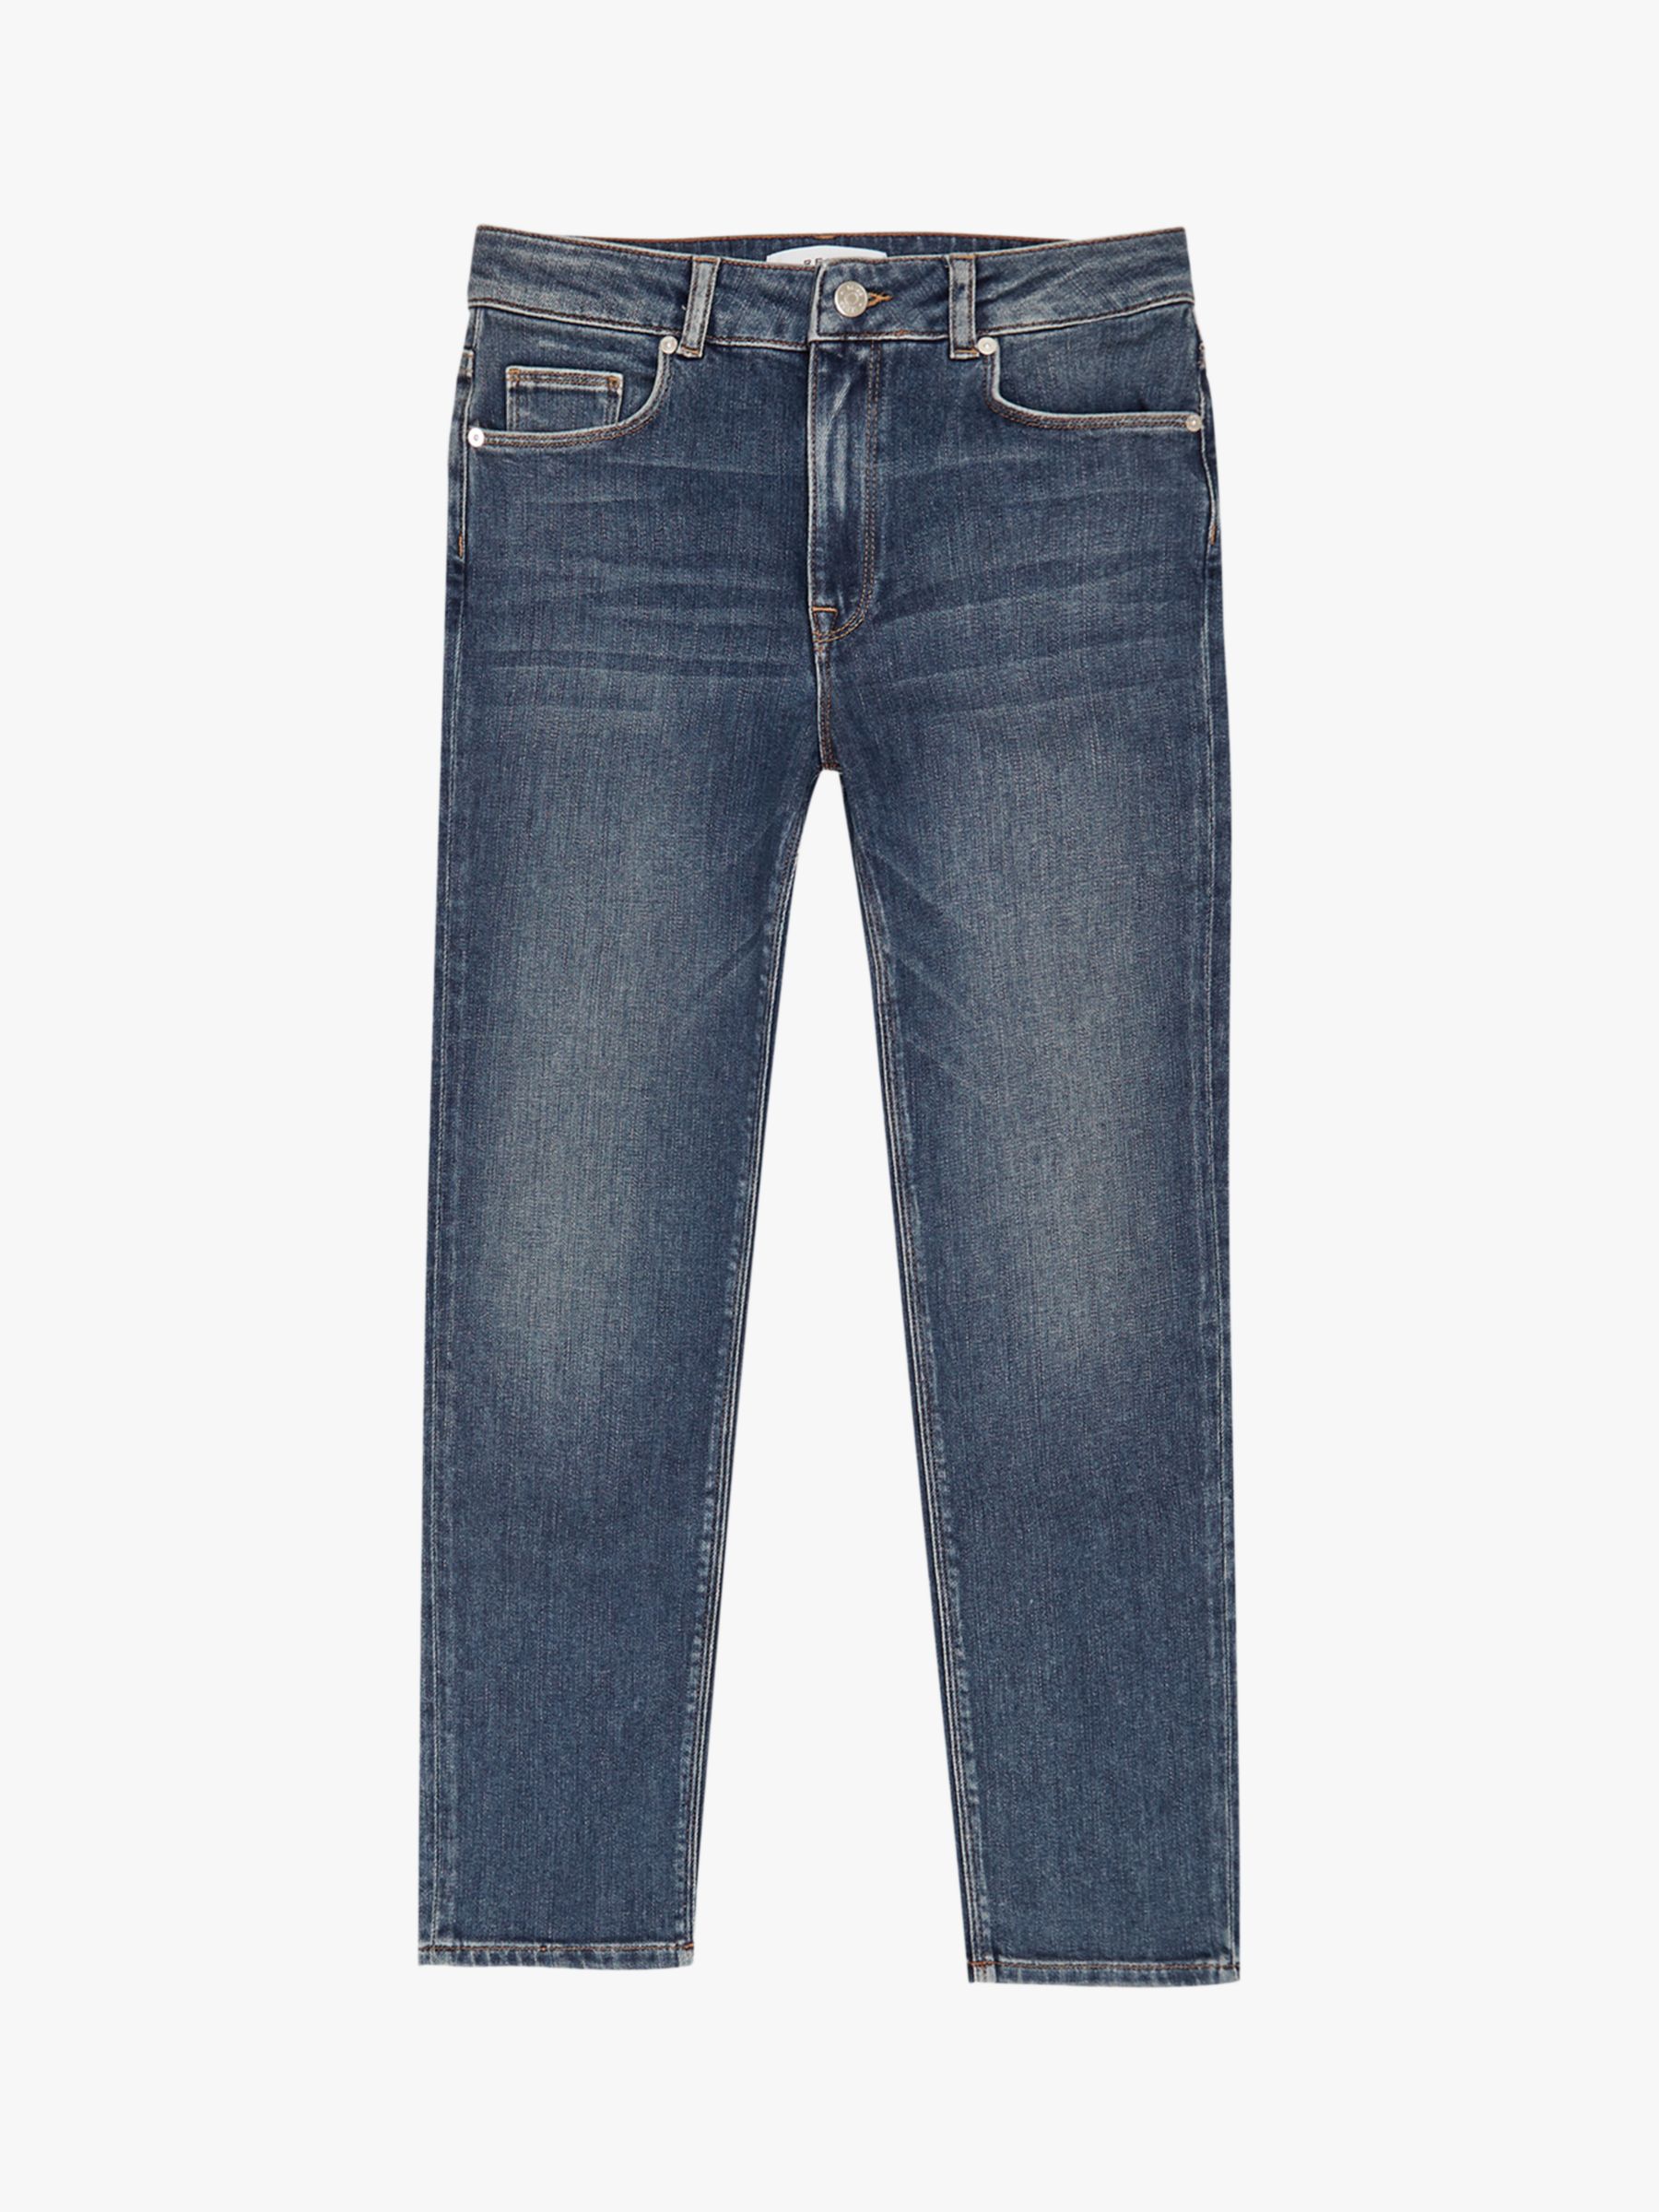 Reiss Bailey Straight Leg Jeans, Washed Blue at John Lewis & Partners